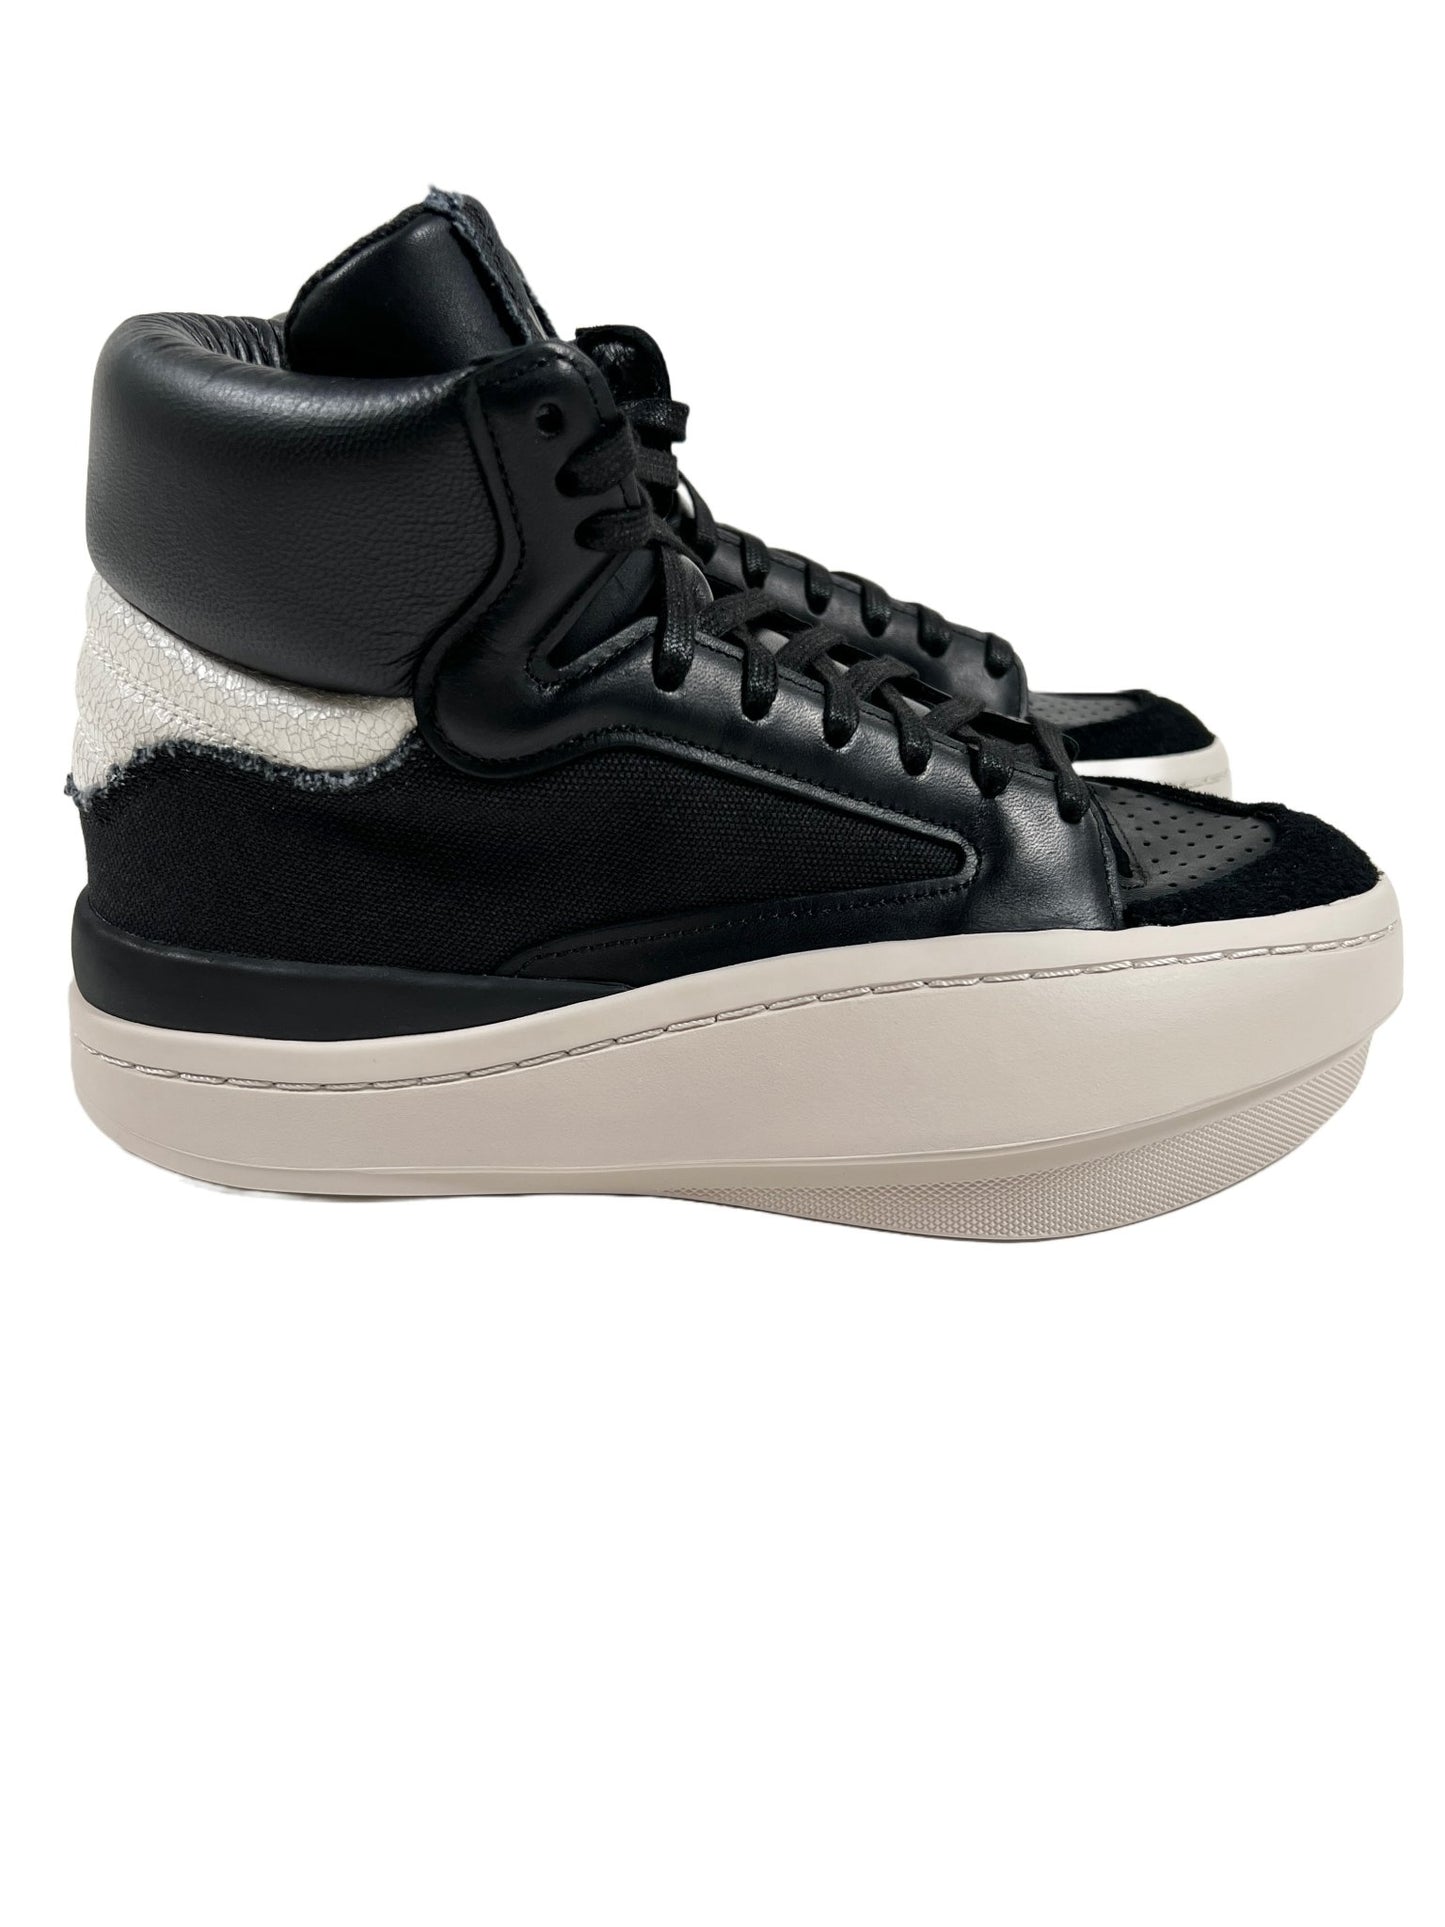 A ADIDAS x Y-3 black and white leather high top sneaker.